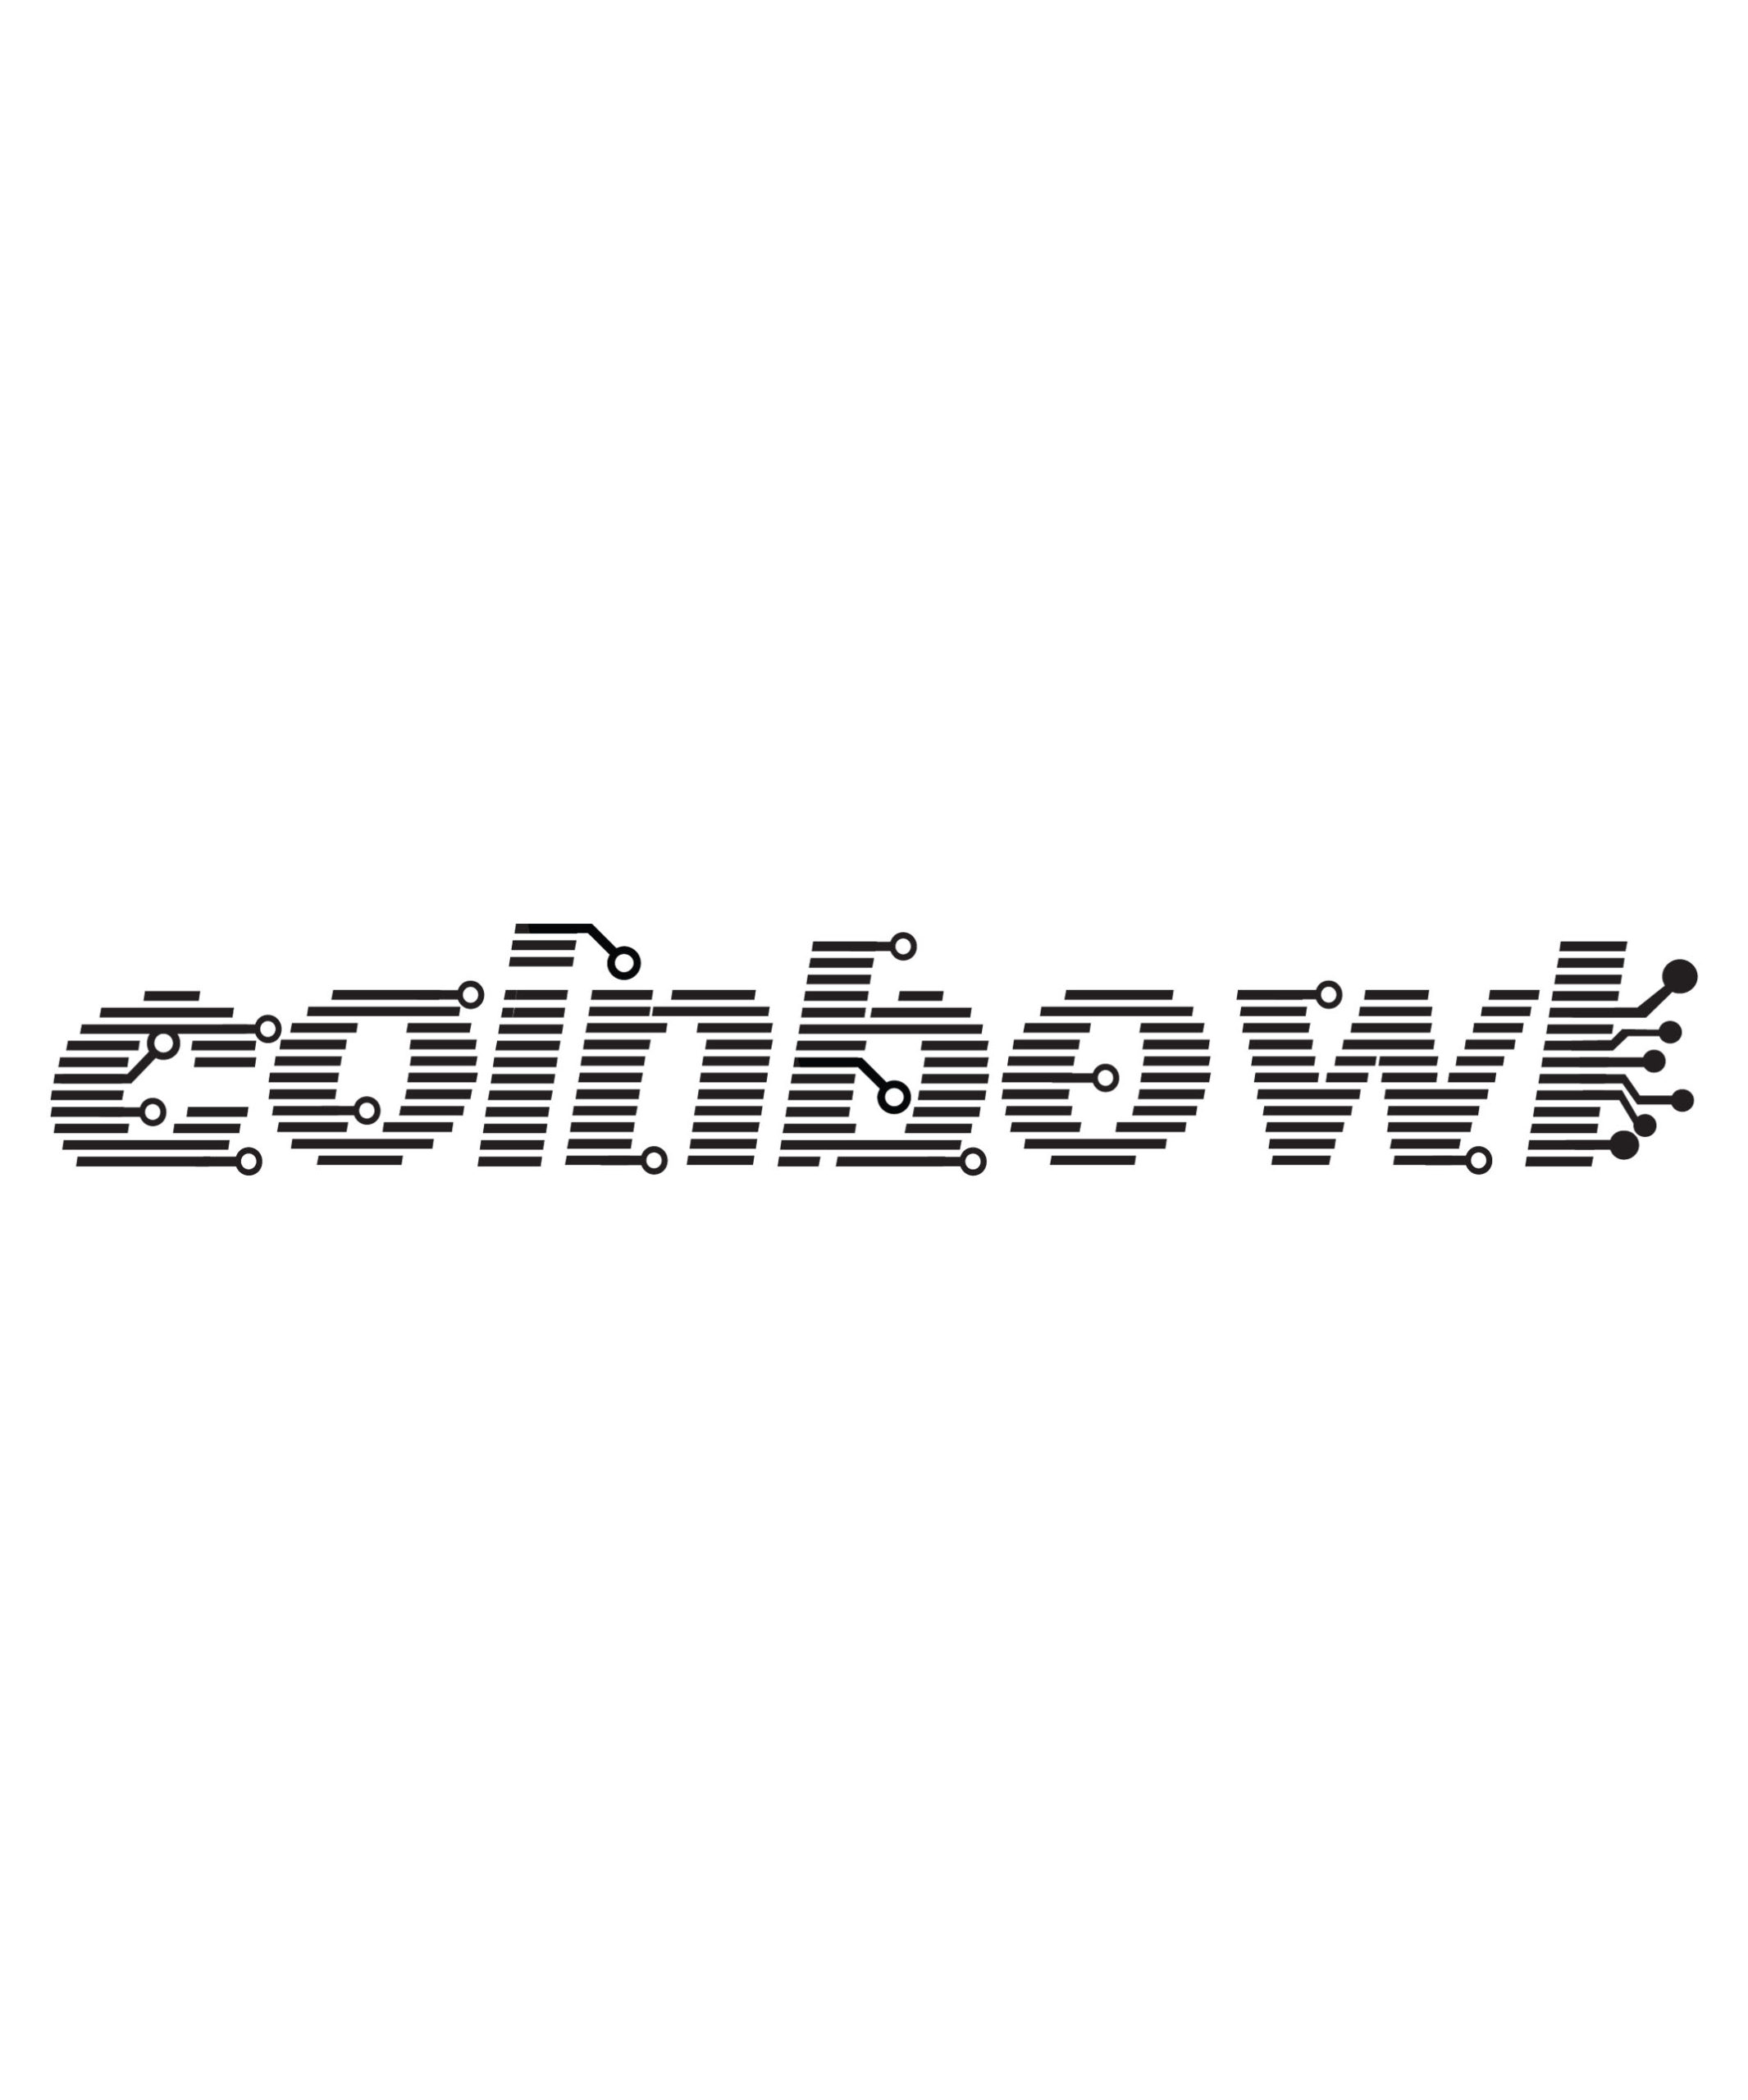 coinbowl_1